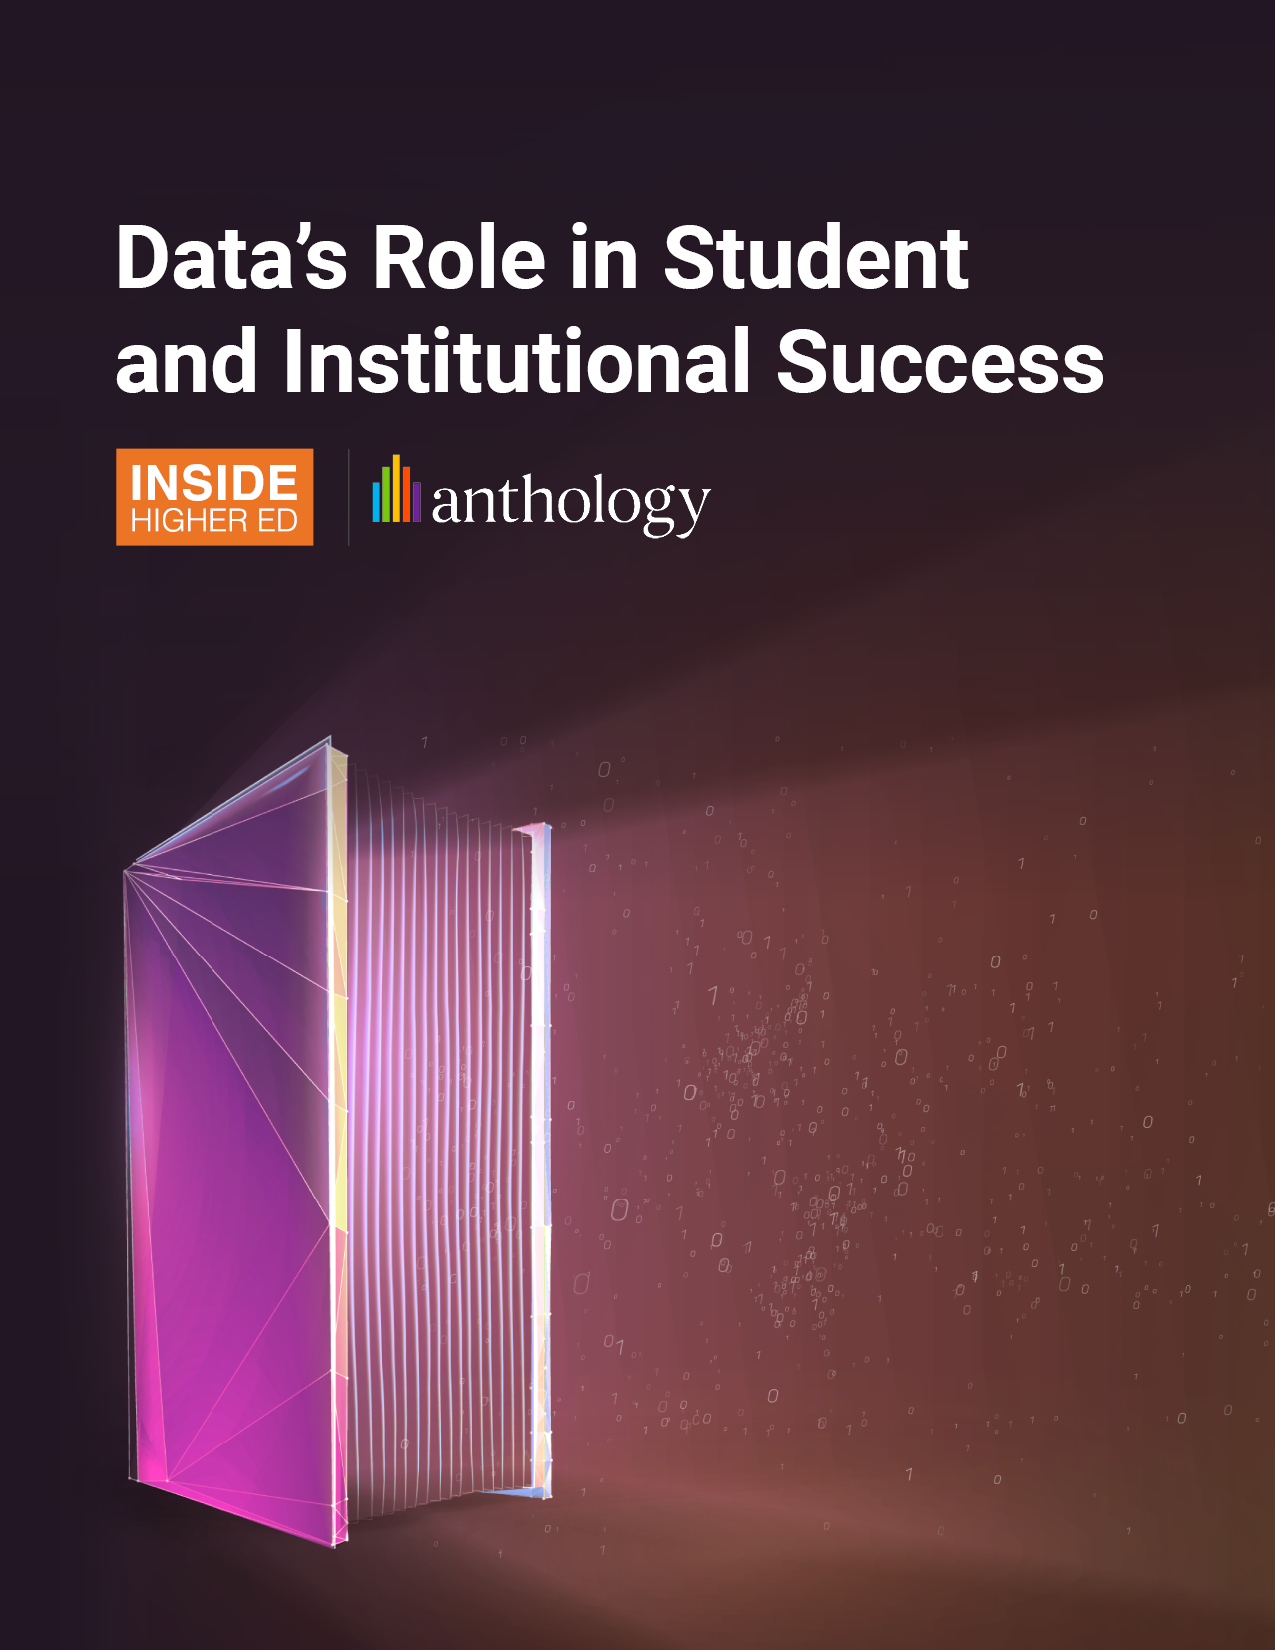 The cover of "Data's Role in Student and Institutional Success"